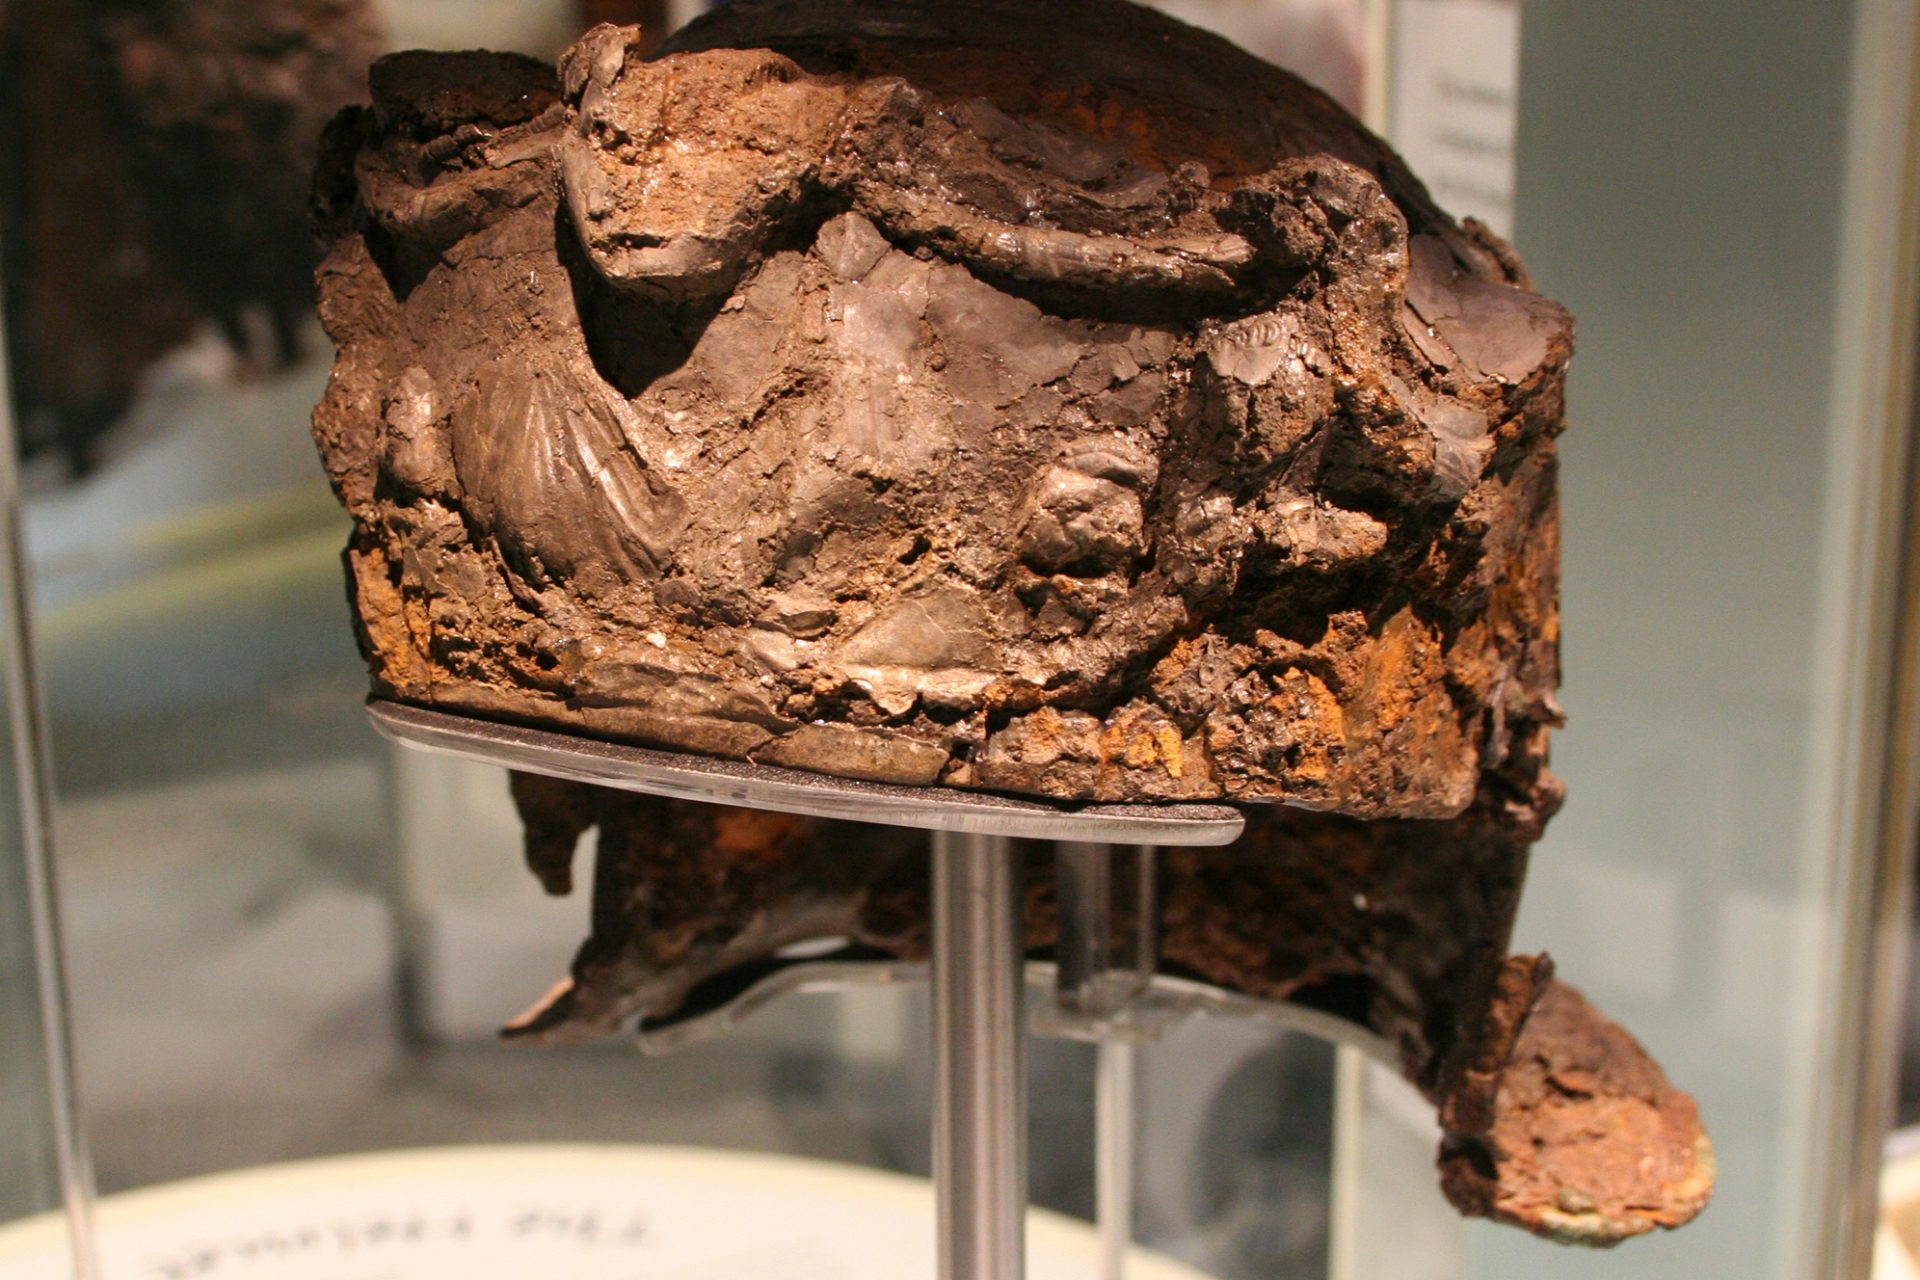 A helmet from Britain's Roman occupation 